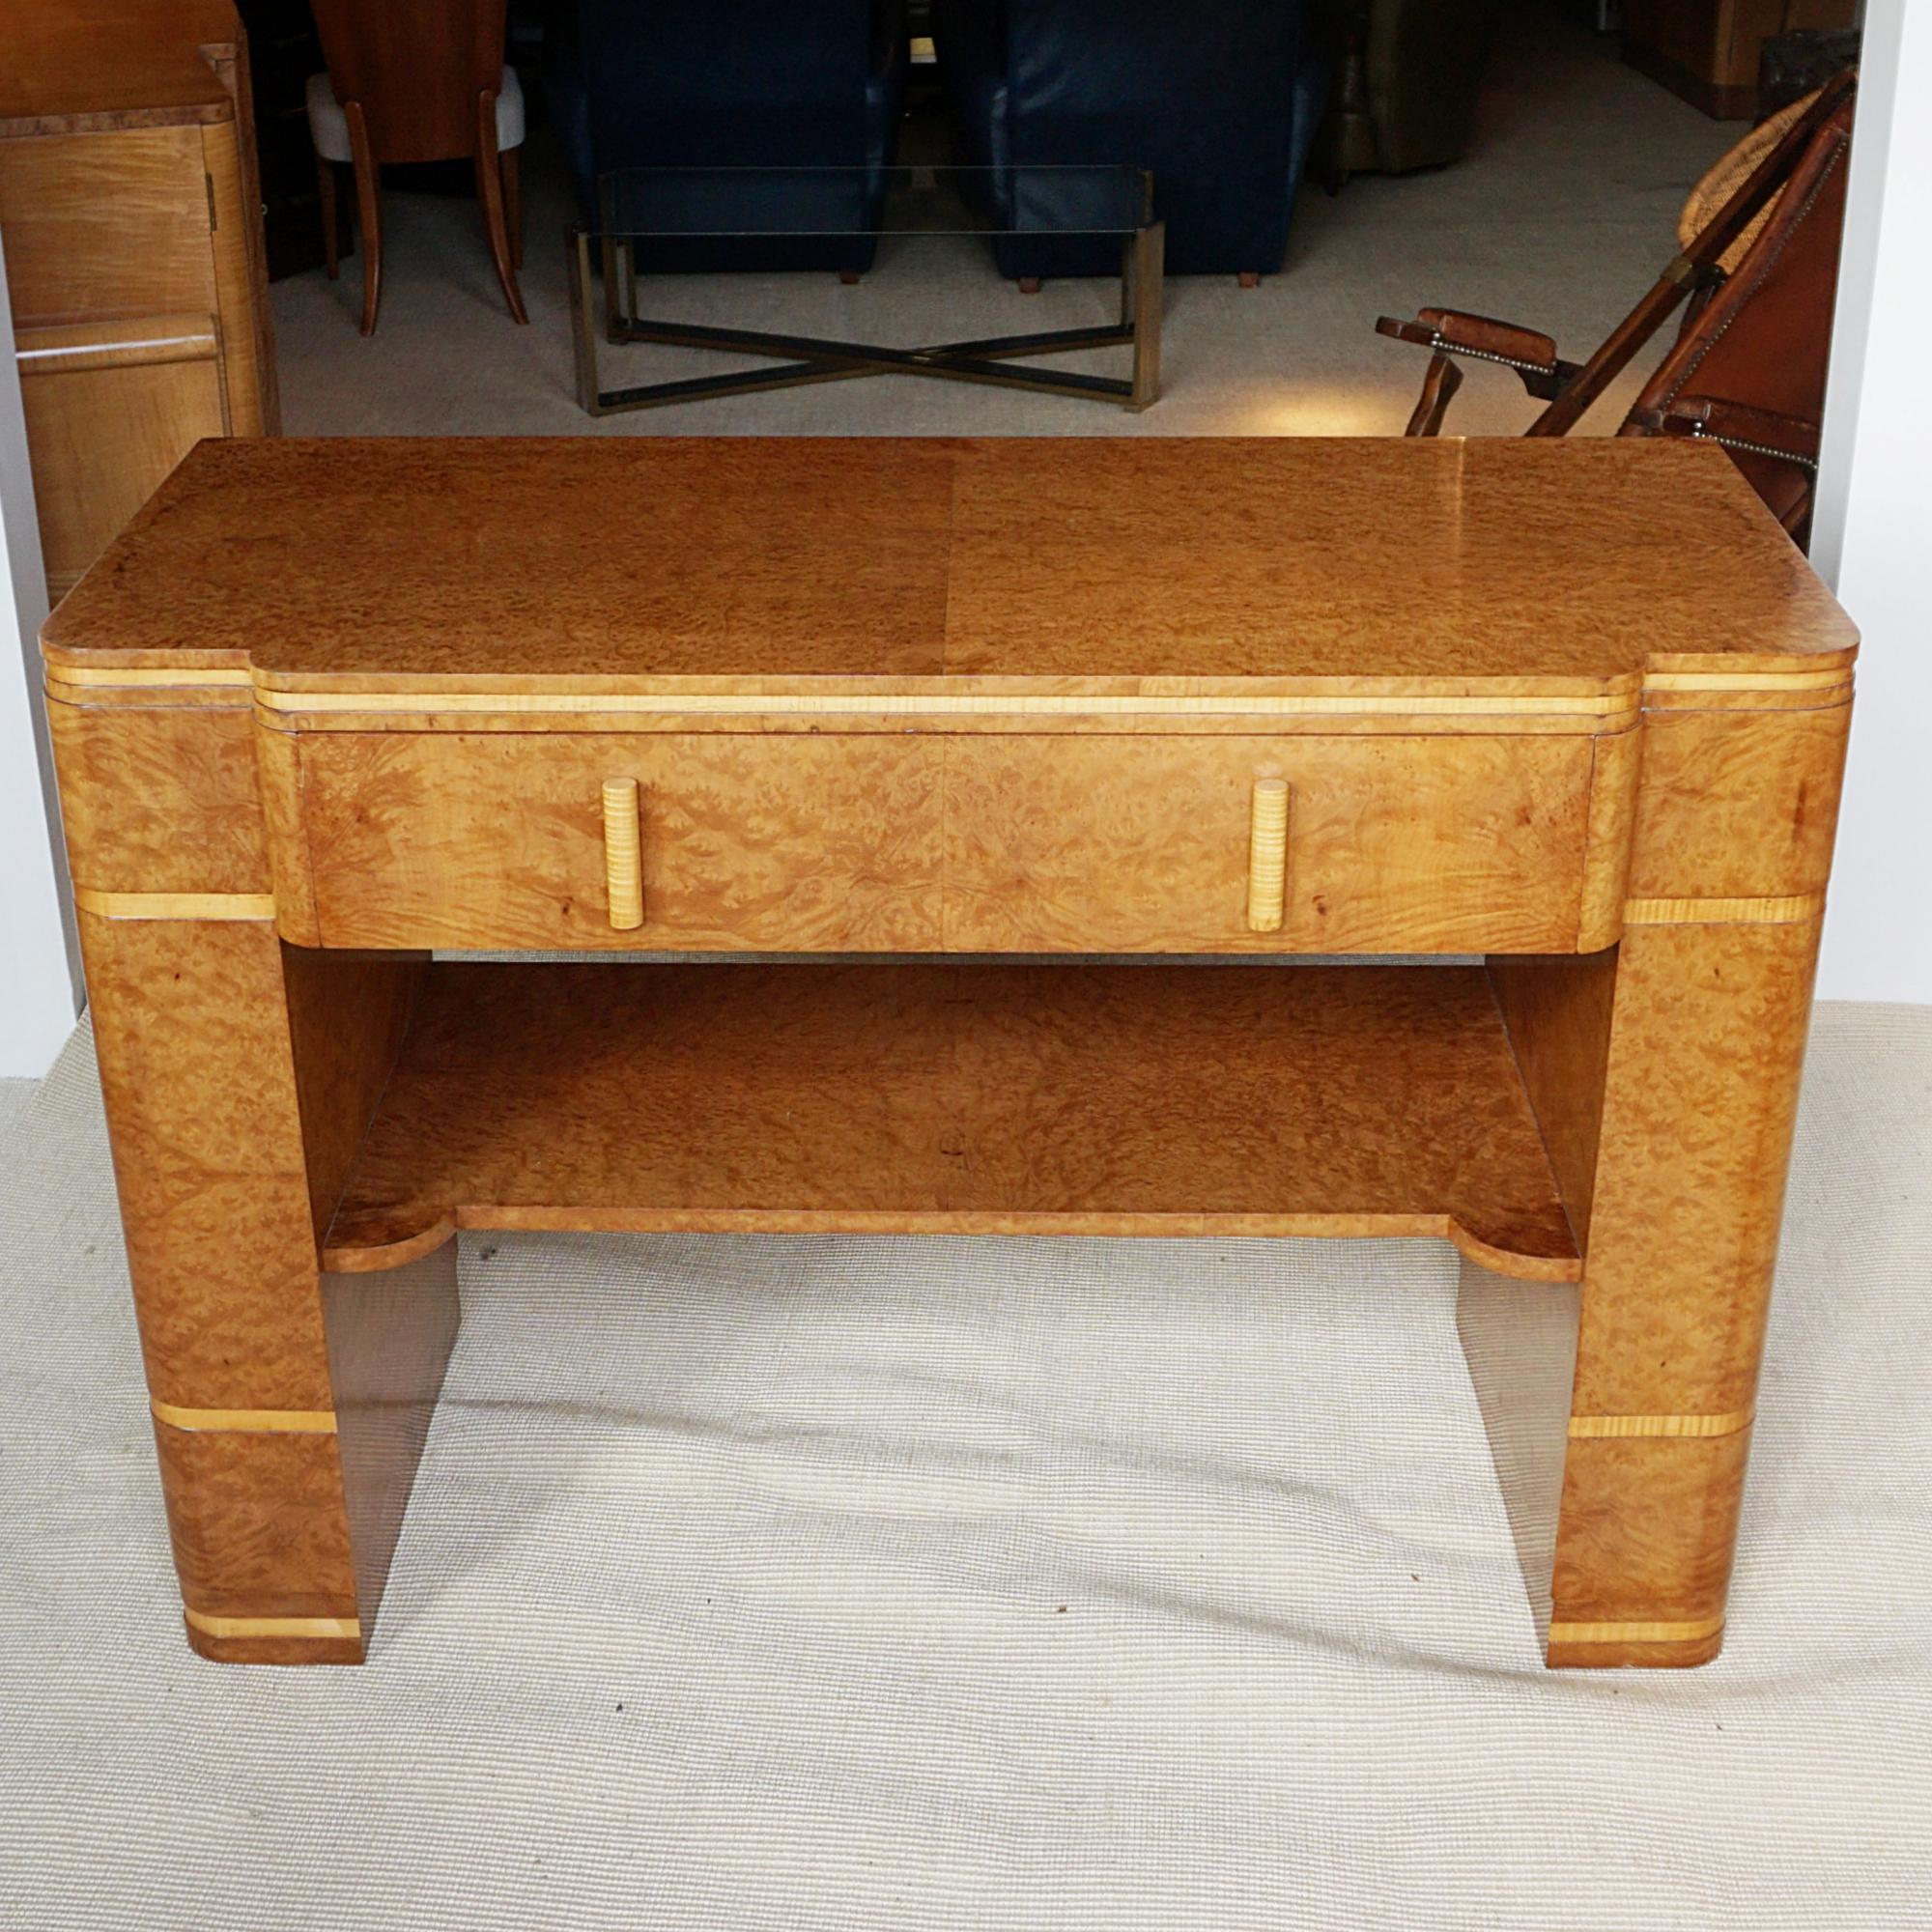 An Art Deco Console Table by Harry & Lou Epstein. Burr walnut veneered with satinbirch banding on solid Mahogany. Central upper drawer with a lower inset shelf. Original walnut handles. 

The Epstein company was founded in London during the 1890’s